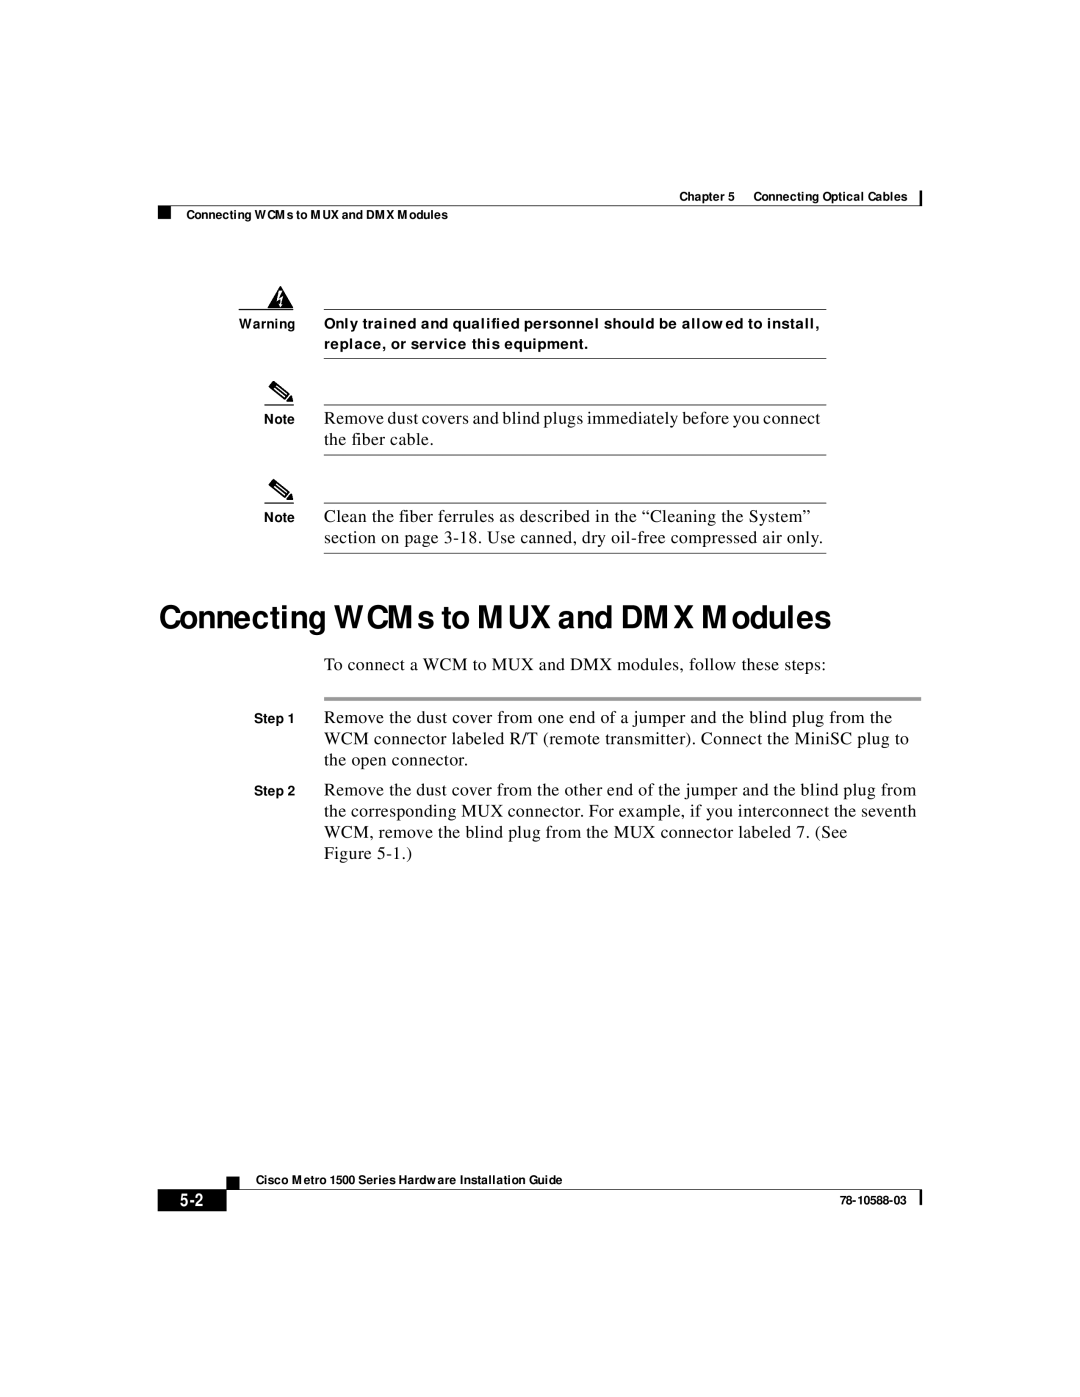 Cisco Systems 1500 manual Connecting WCMs to MUX and DMX Modules 